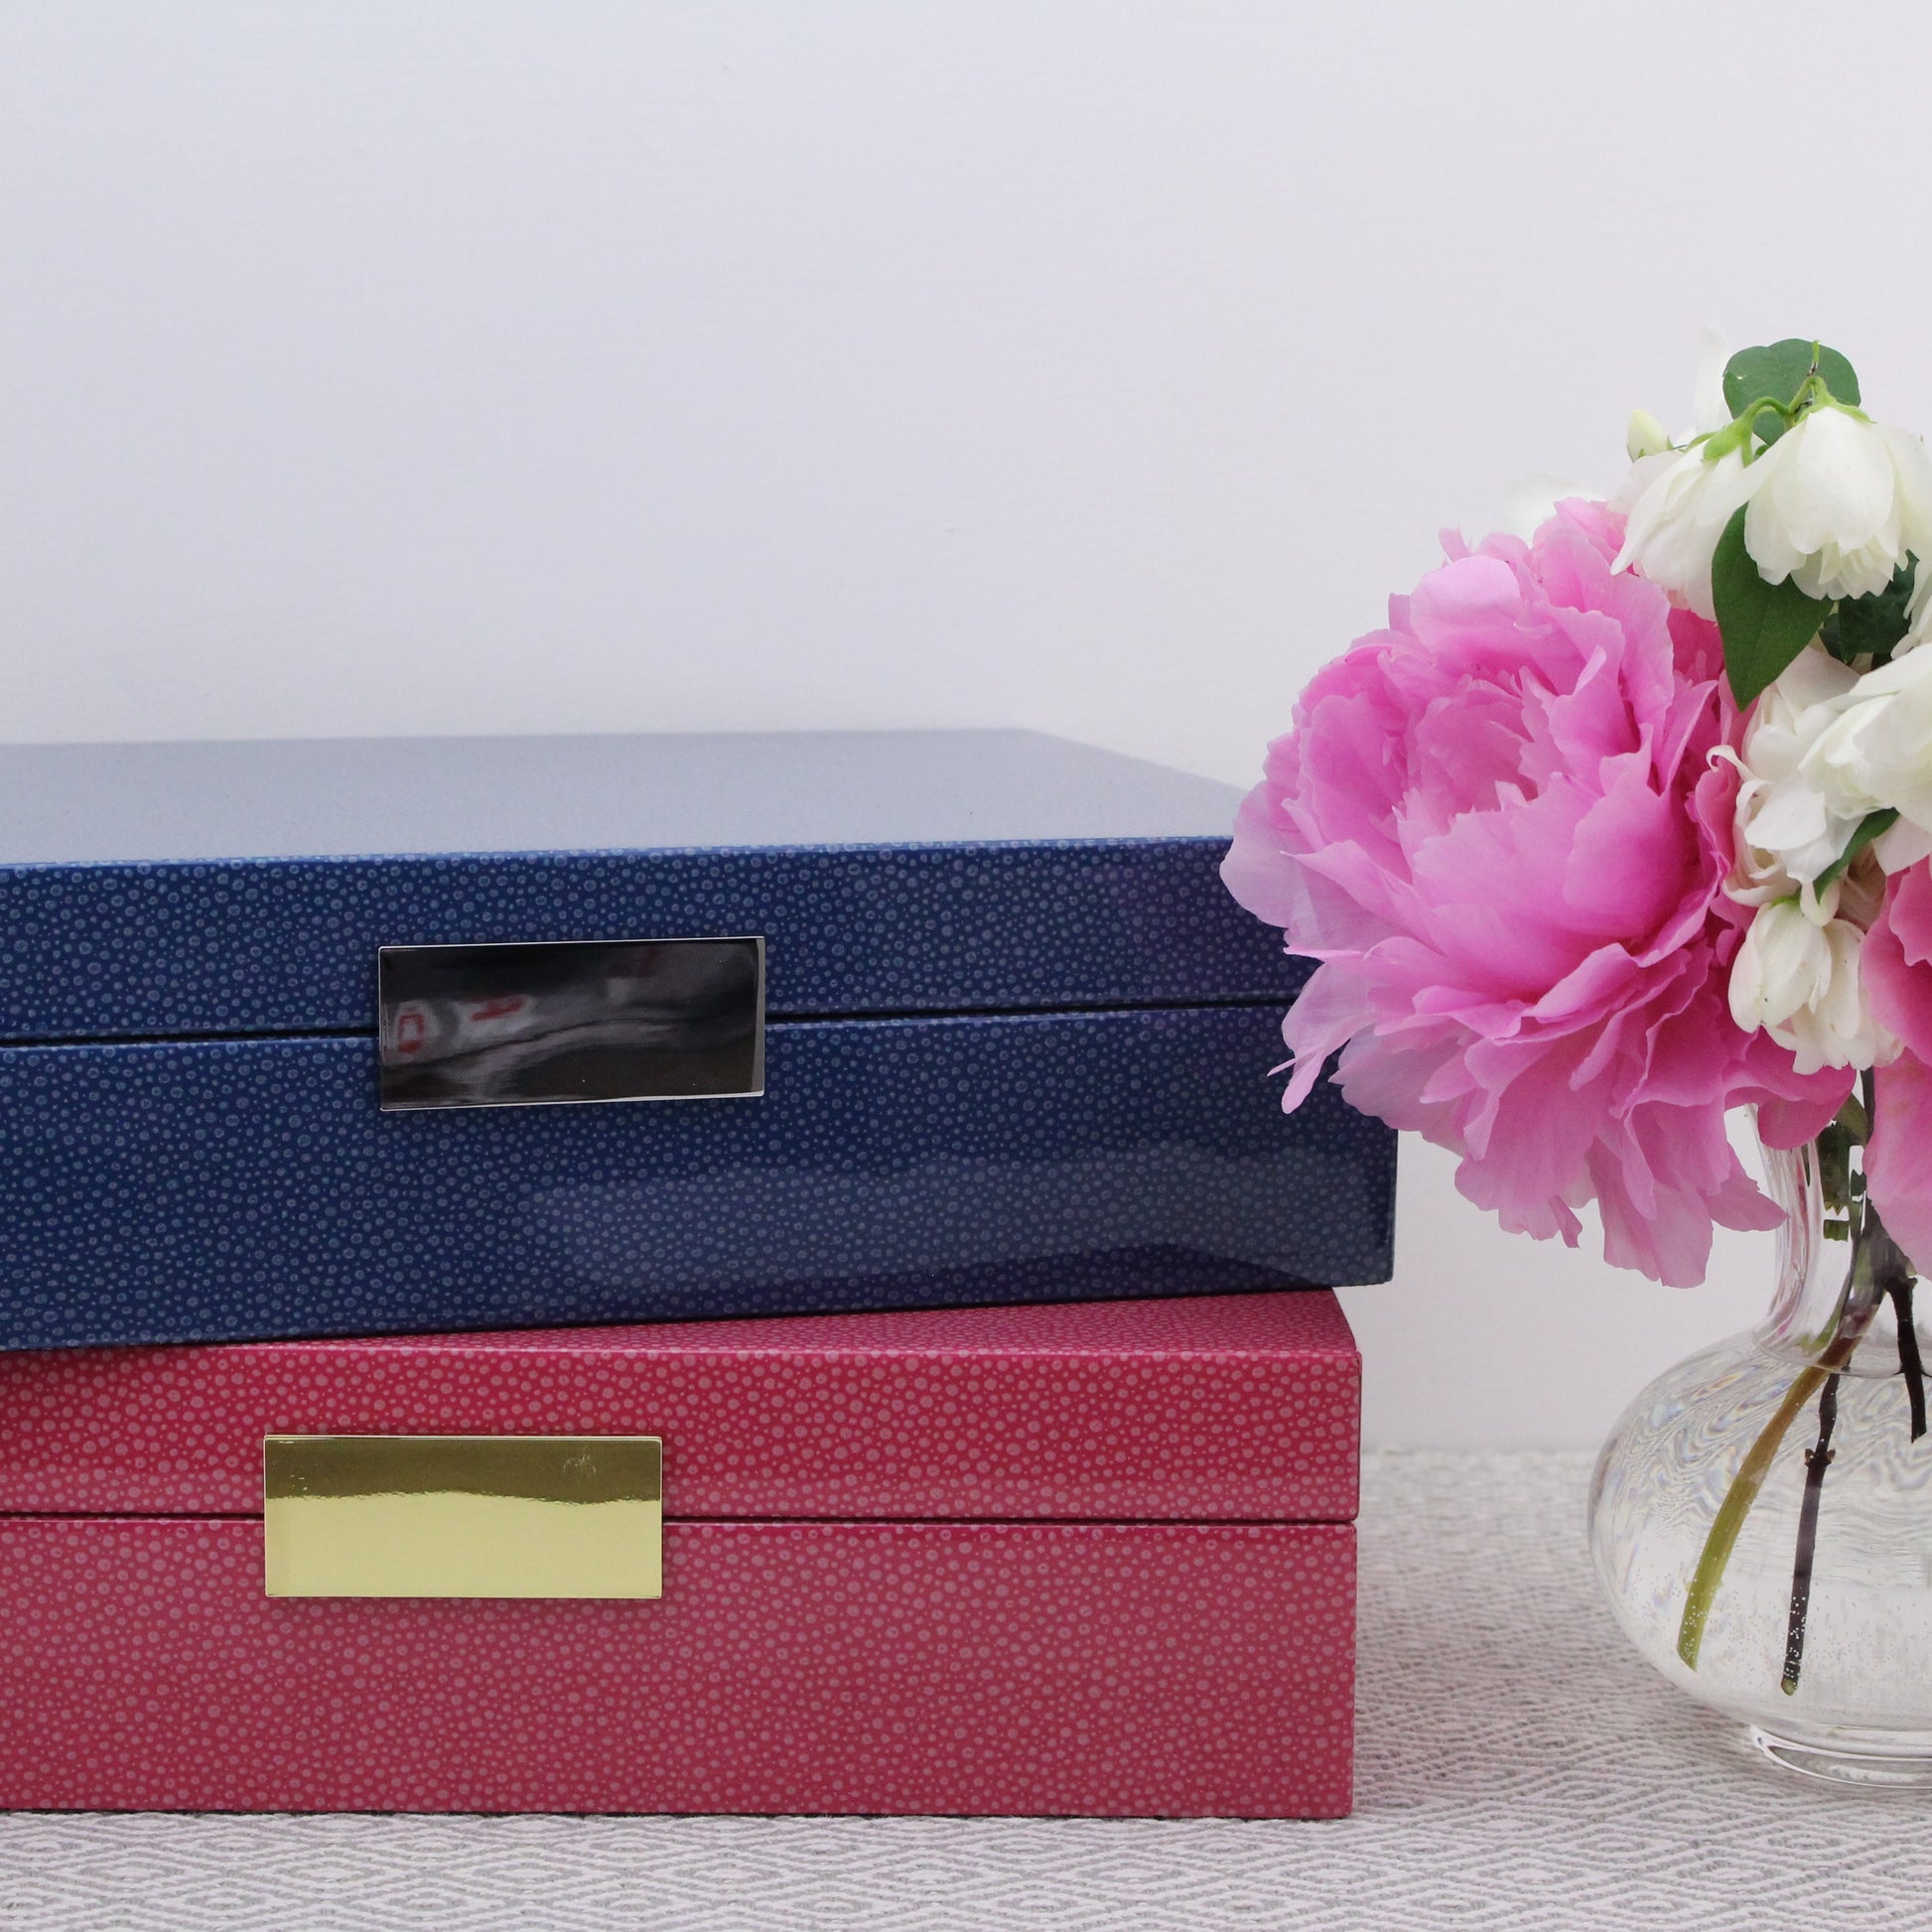 Large Pink Shagreen Lacquer Box with Gold - Addison Ross Ltd UK